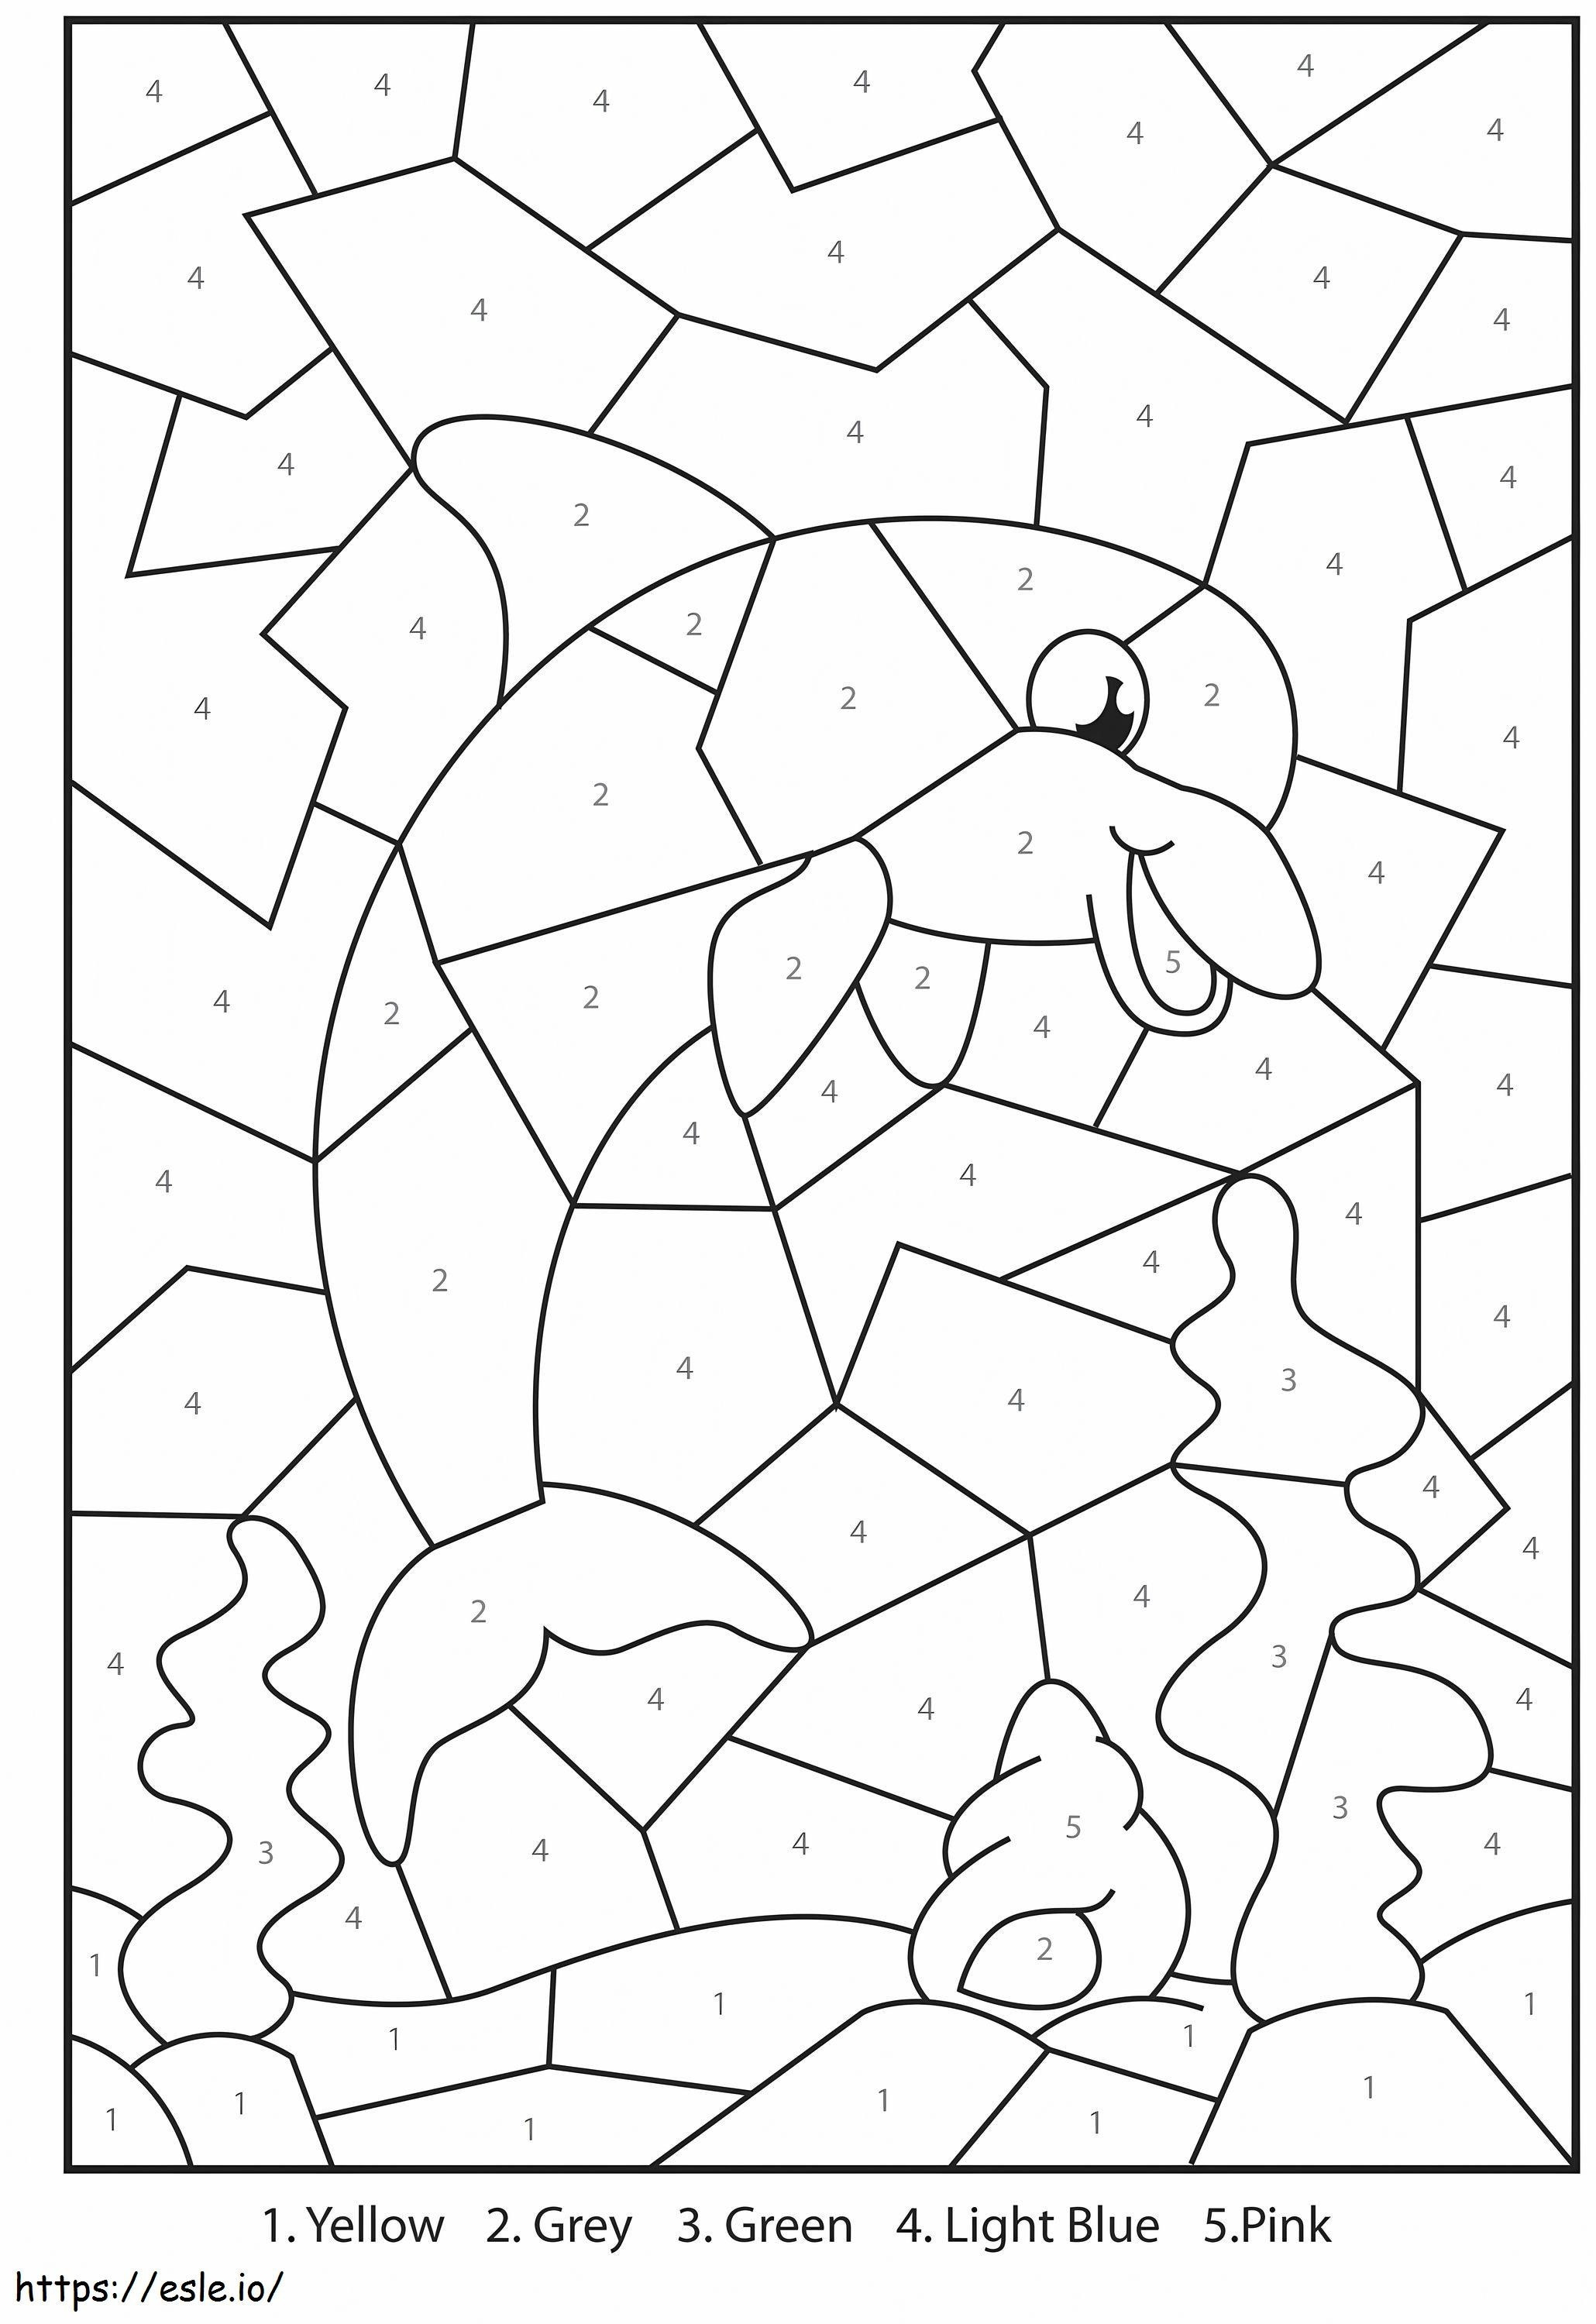 1573088280 F994343Cd3A53D716D6F2B9002A4154F Scaled 2 coloring page